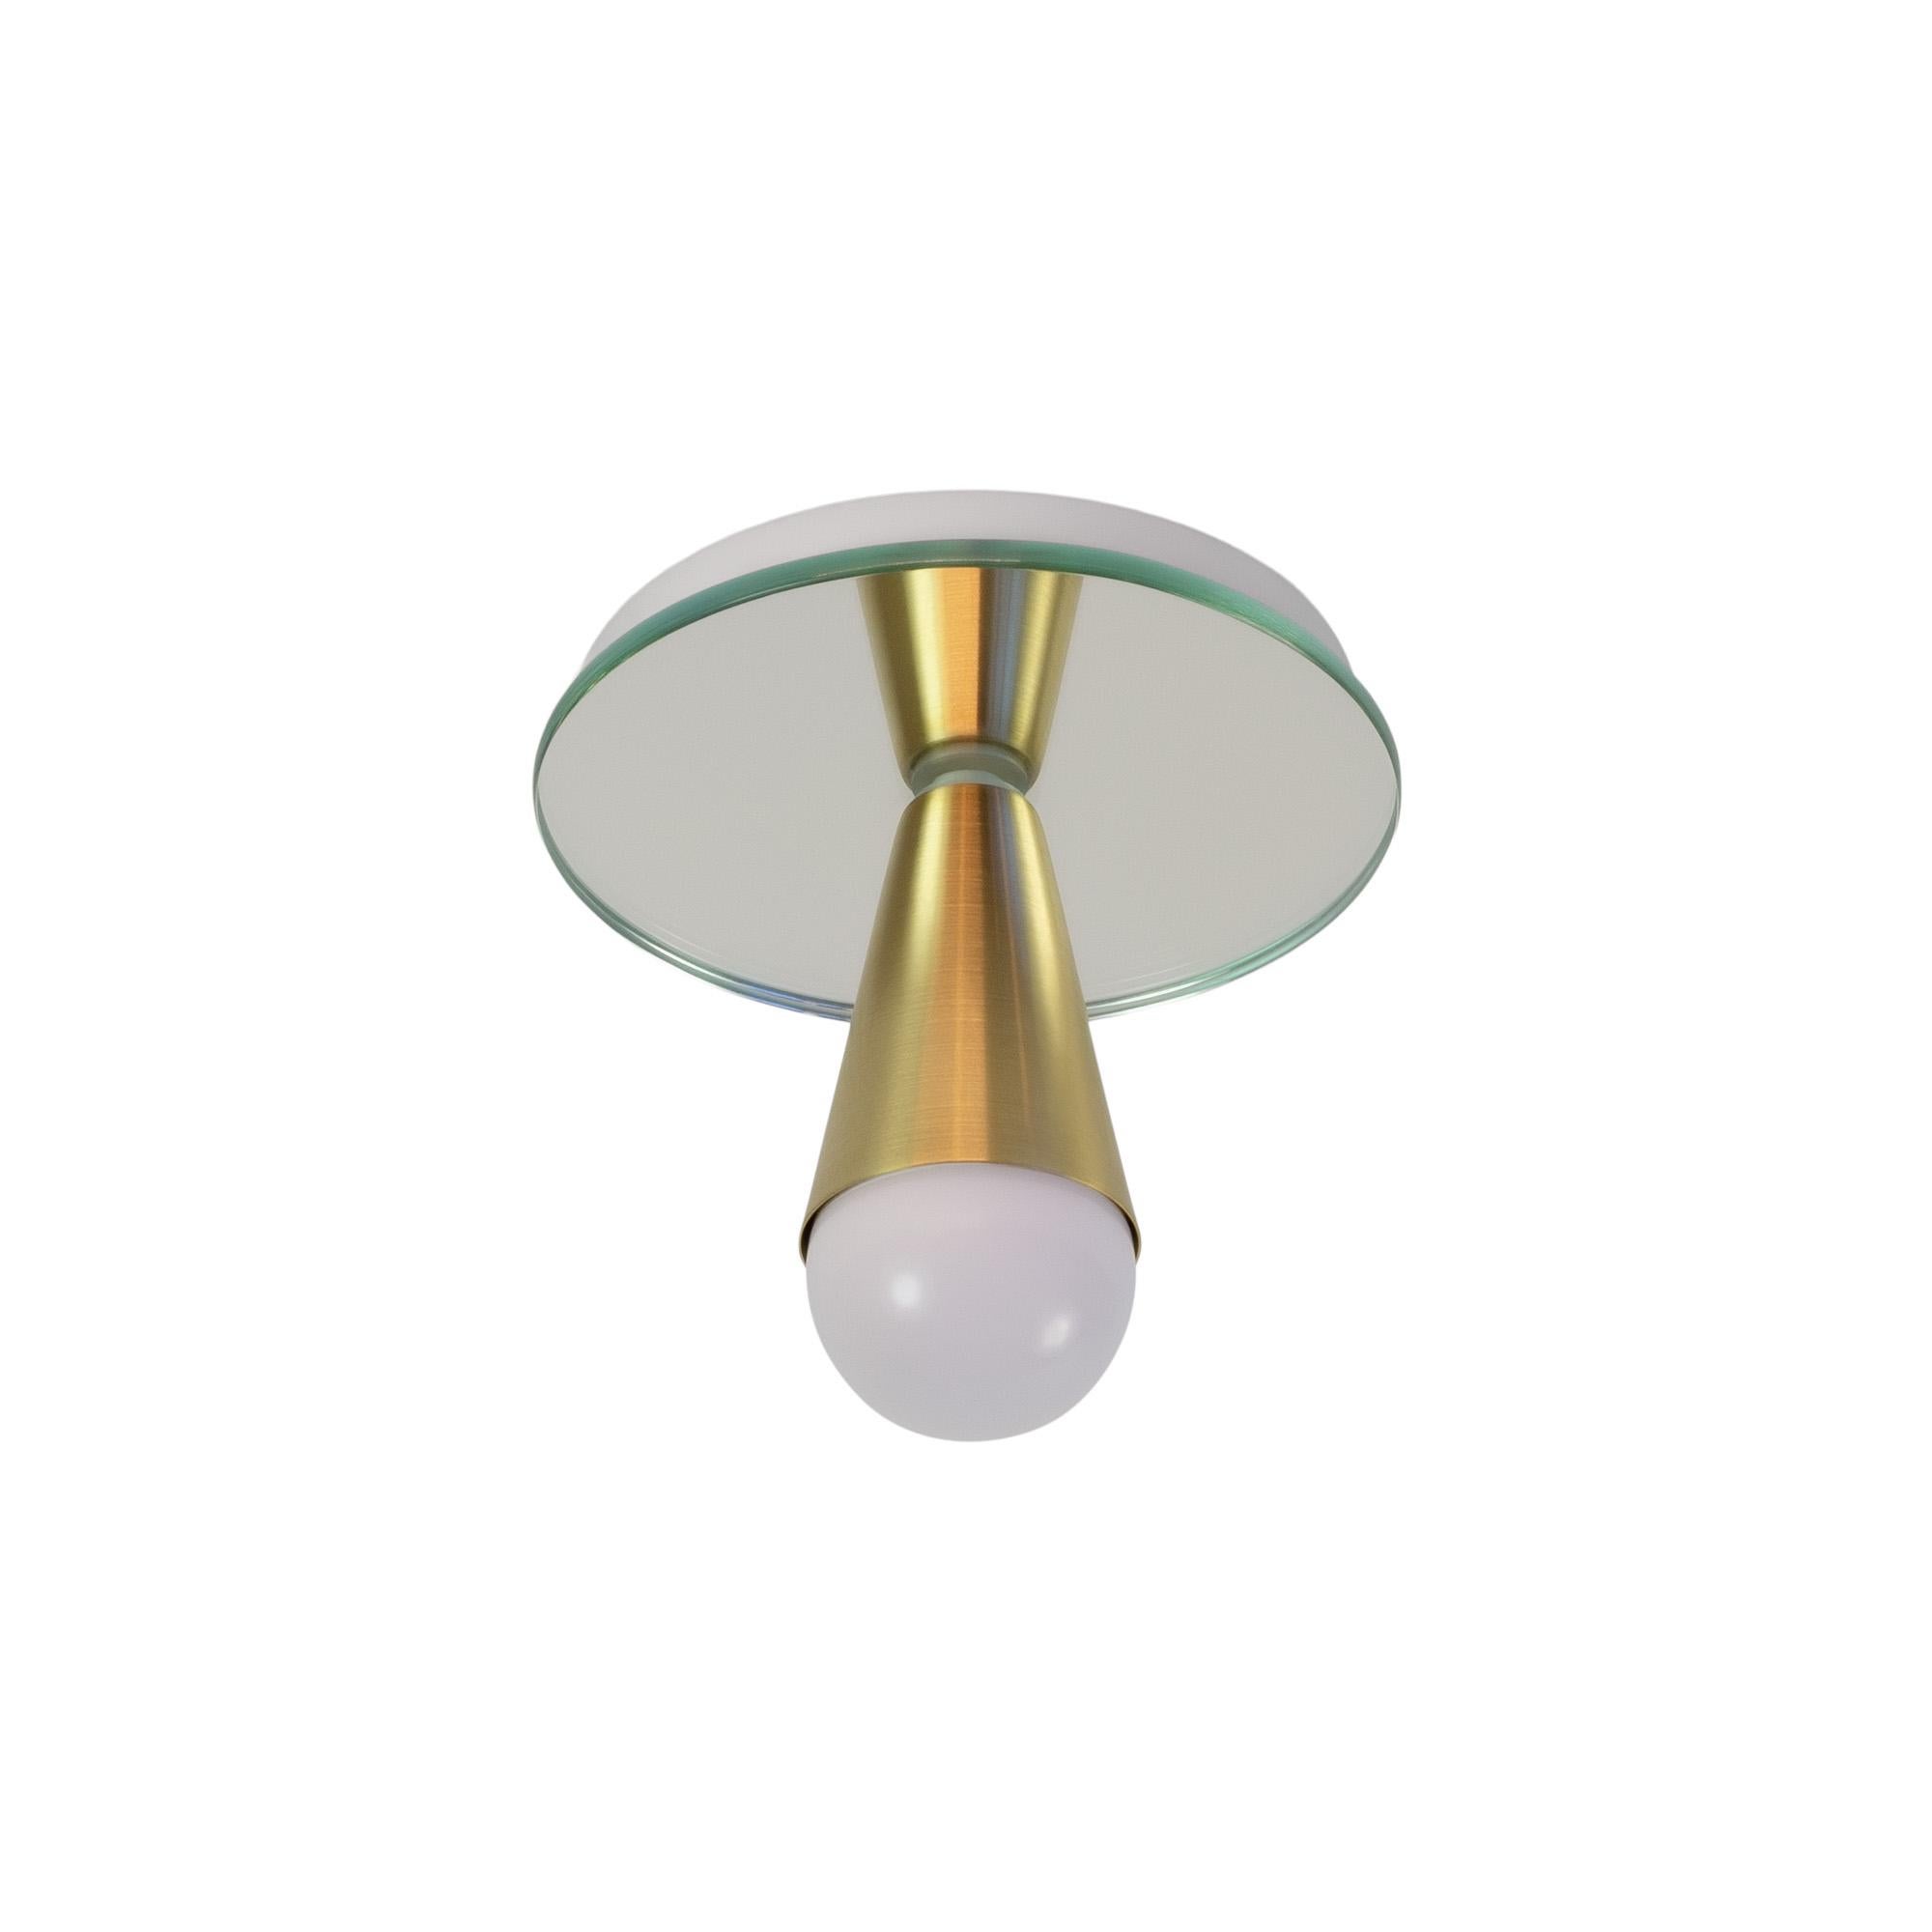 Simple, elegant, and playful, the Echo series is a line of surface-mount fixtures that can be used on a wall or ceiling. White or brass cones mount to mirrored glass to perfectly reflect each bulb, giving the illusion of lights floating in